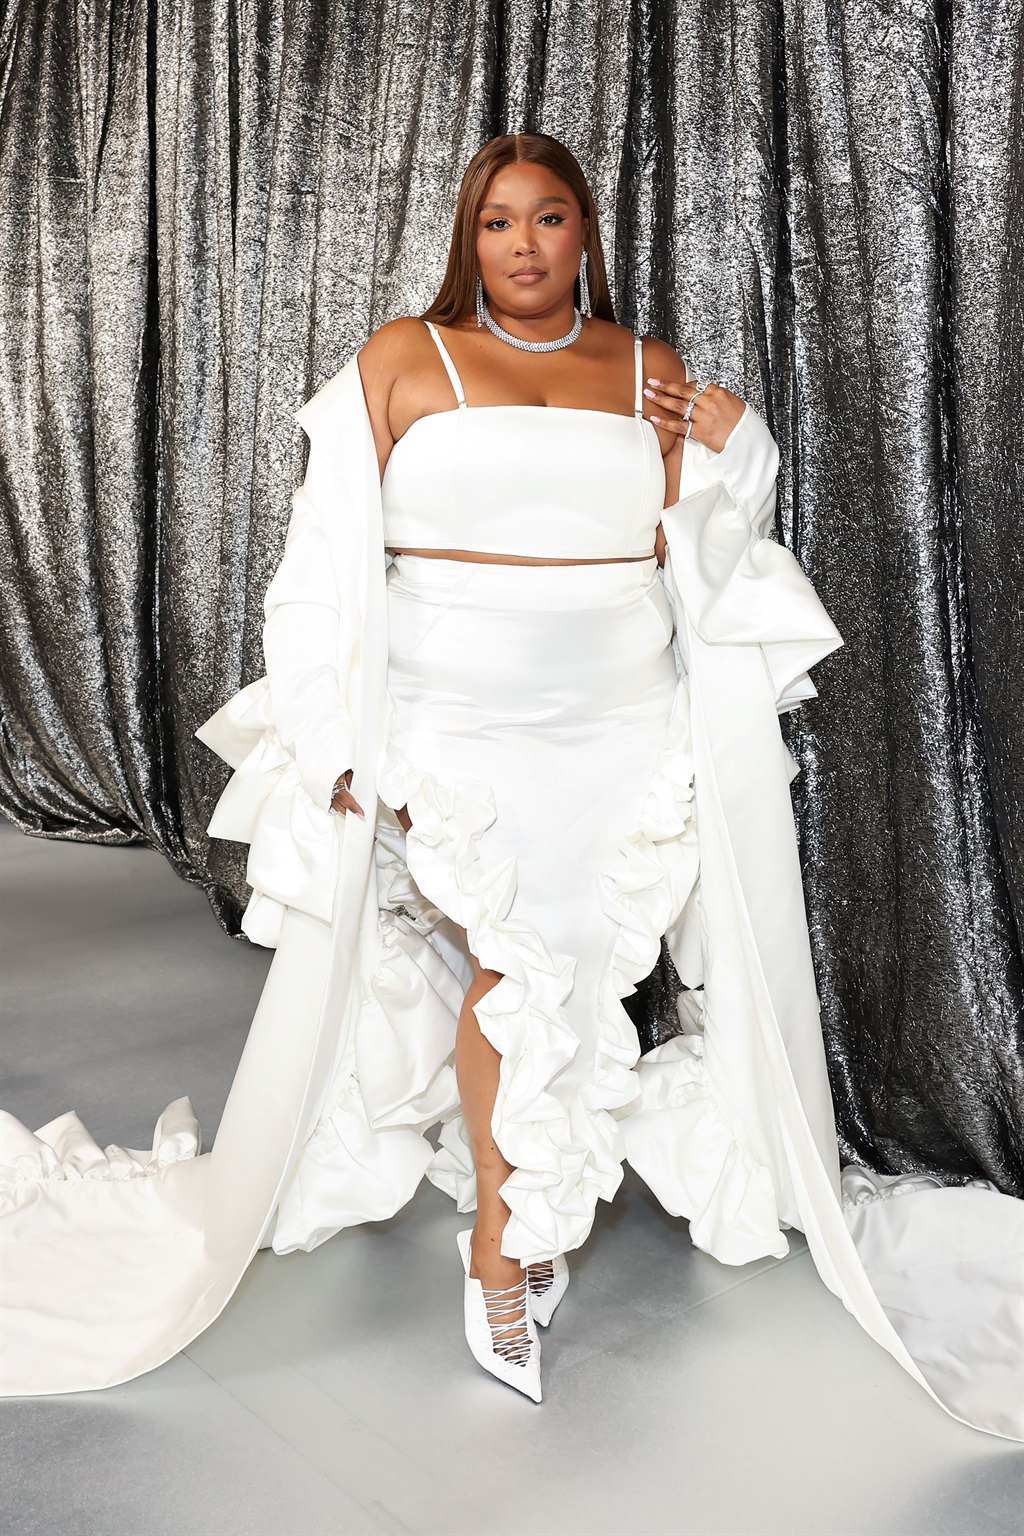 Lizzo attends the World Premiere of Renaissance: A